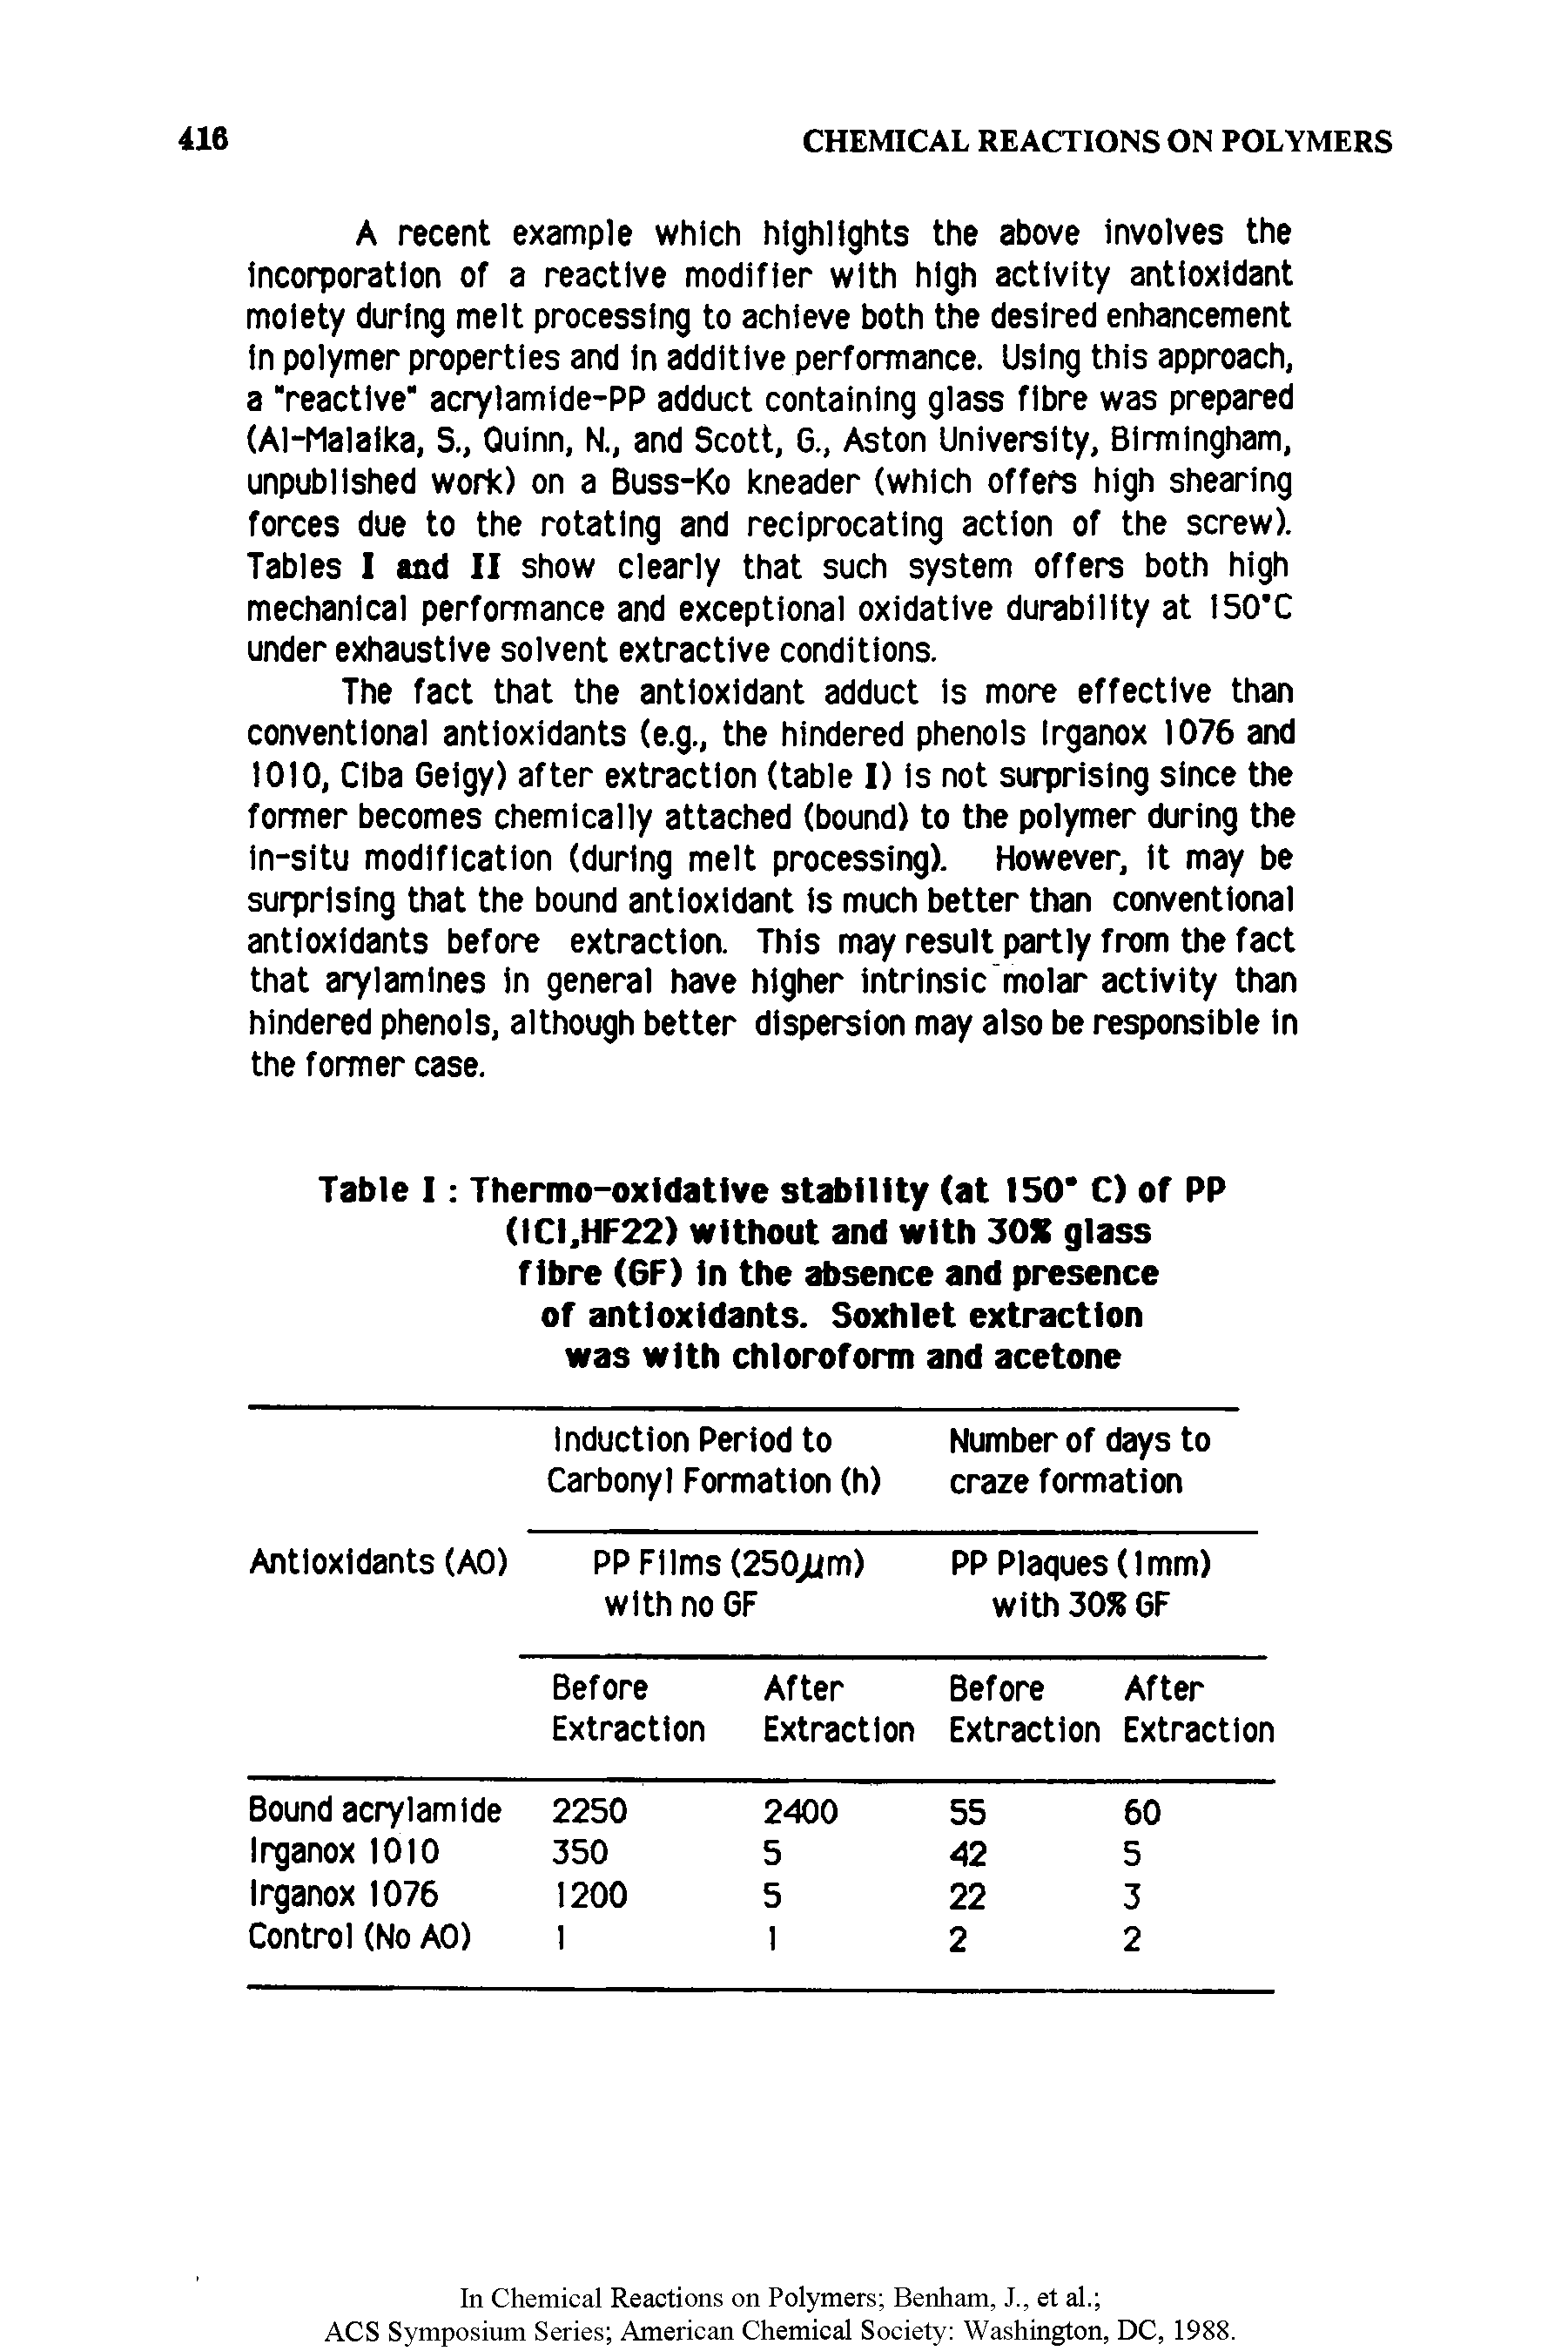 Table I Thermo-oxidative stability (at 150 C) of PP (ICI.HF22) without and with 30X glass fibre (6F) in the absence and presence of antioxidants. Soxhlet extraction was with chloroform and acetone...